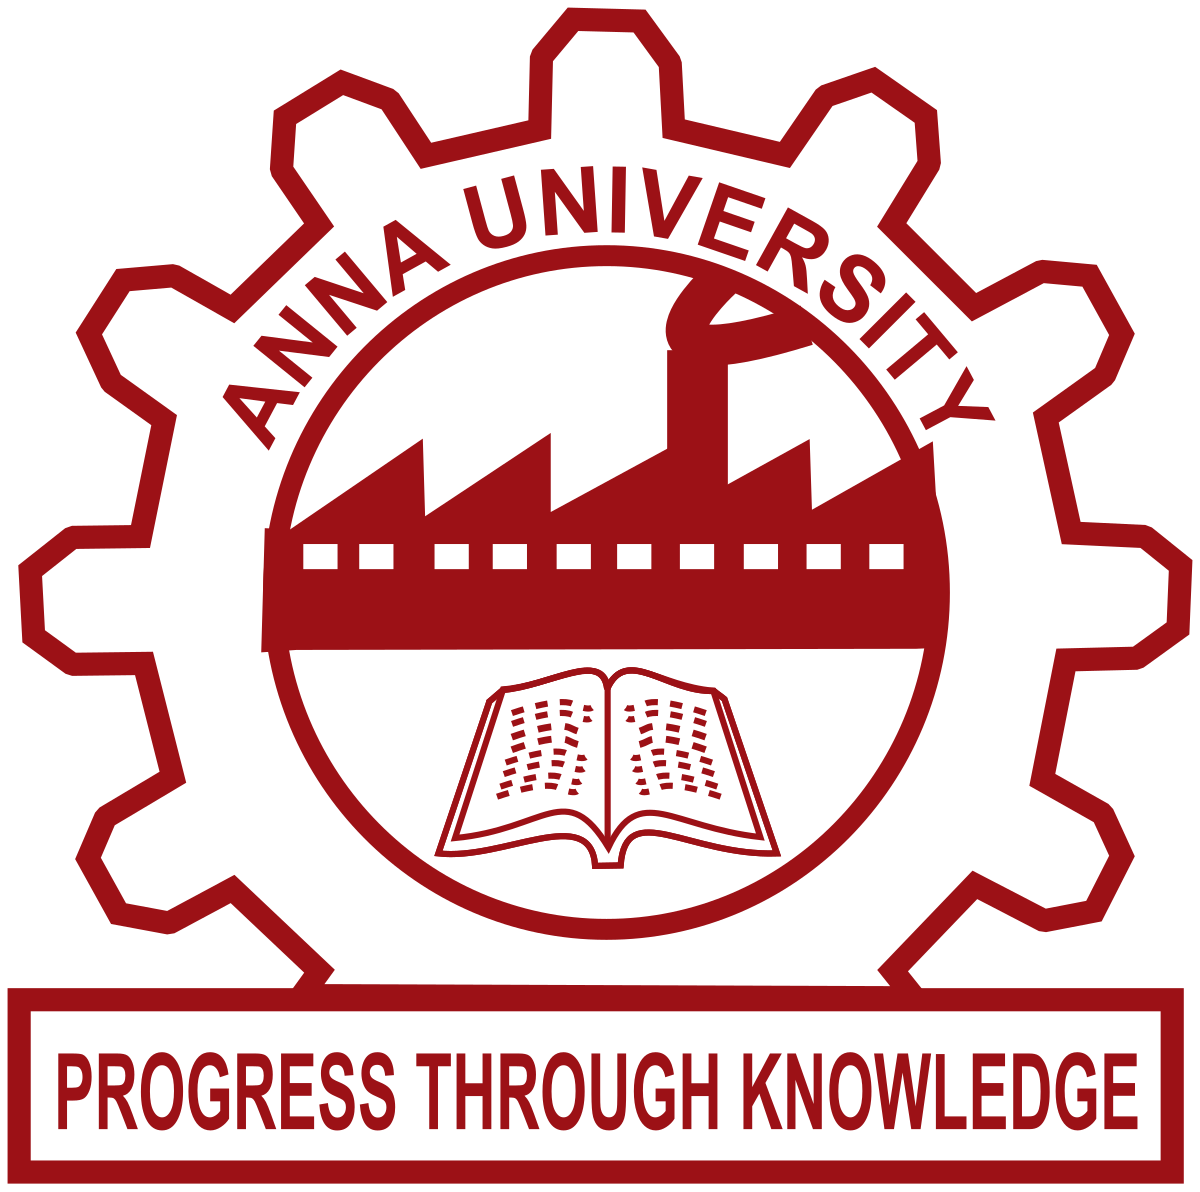 Anna University results April-May 2022 has been announced